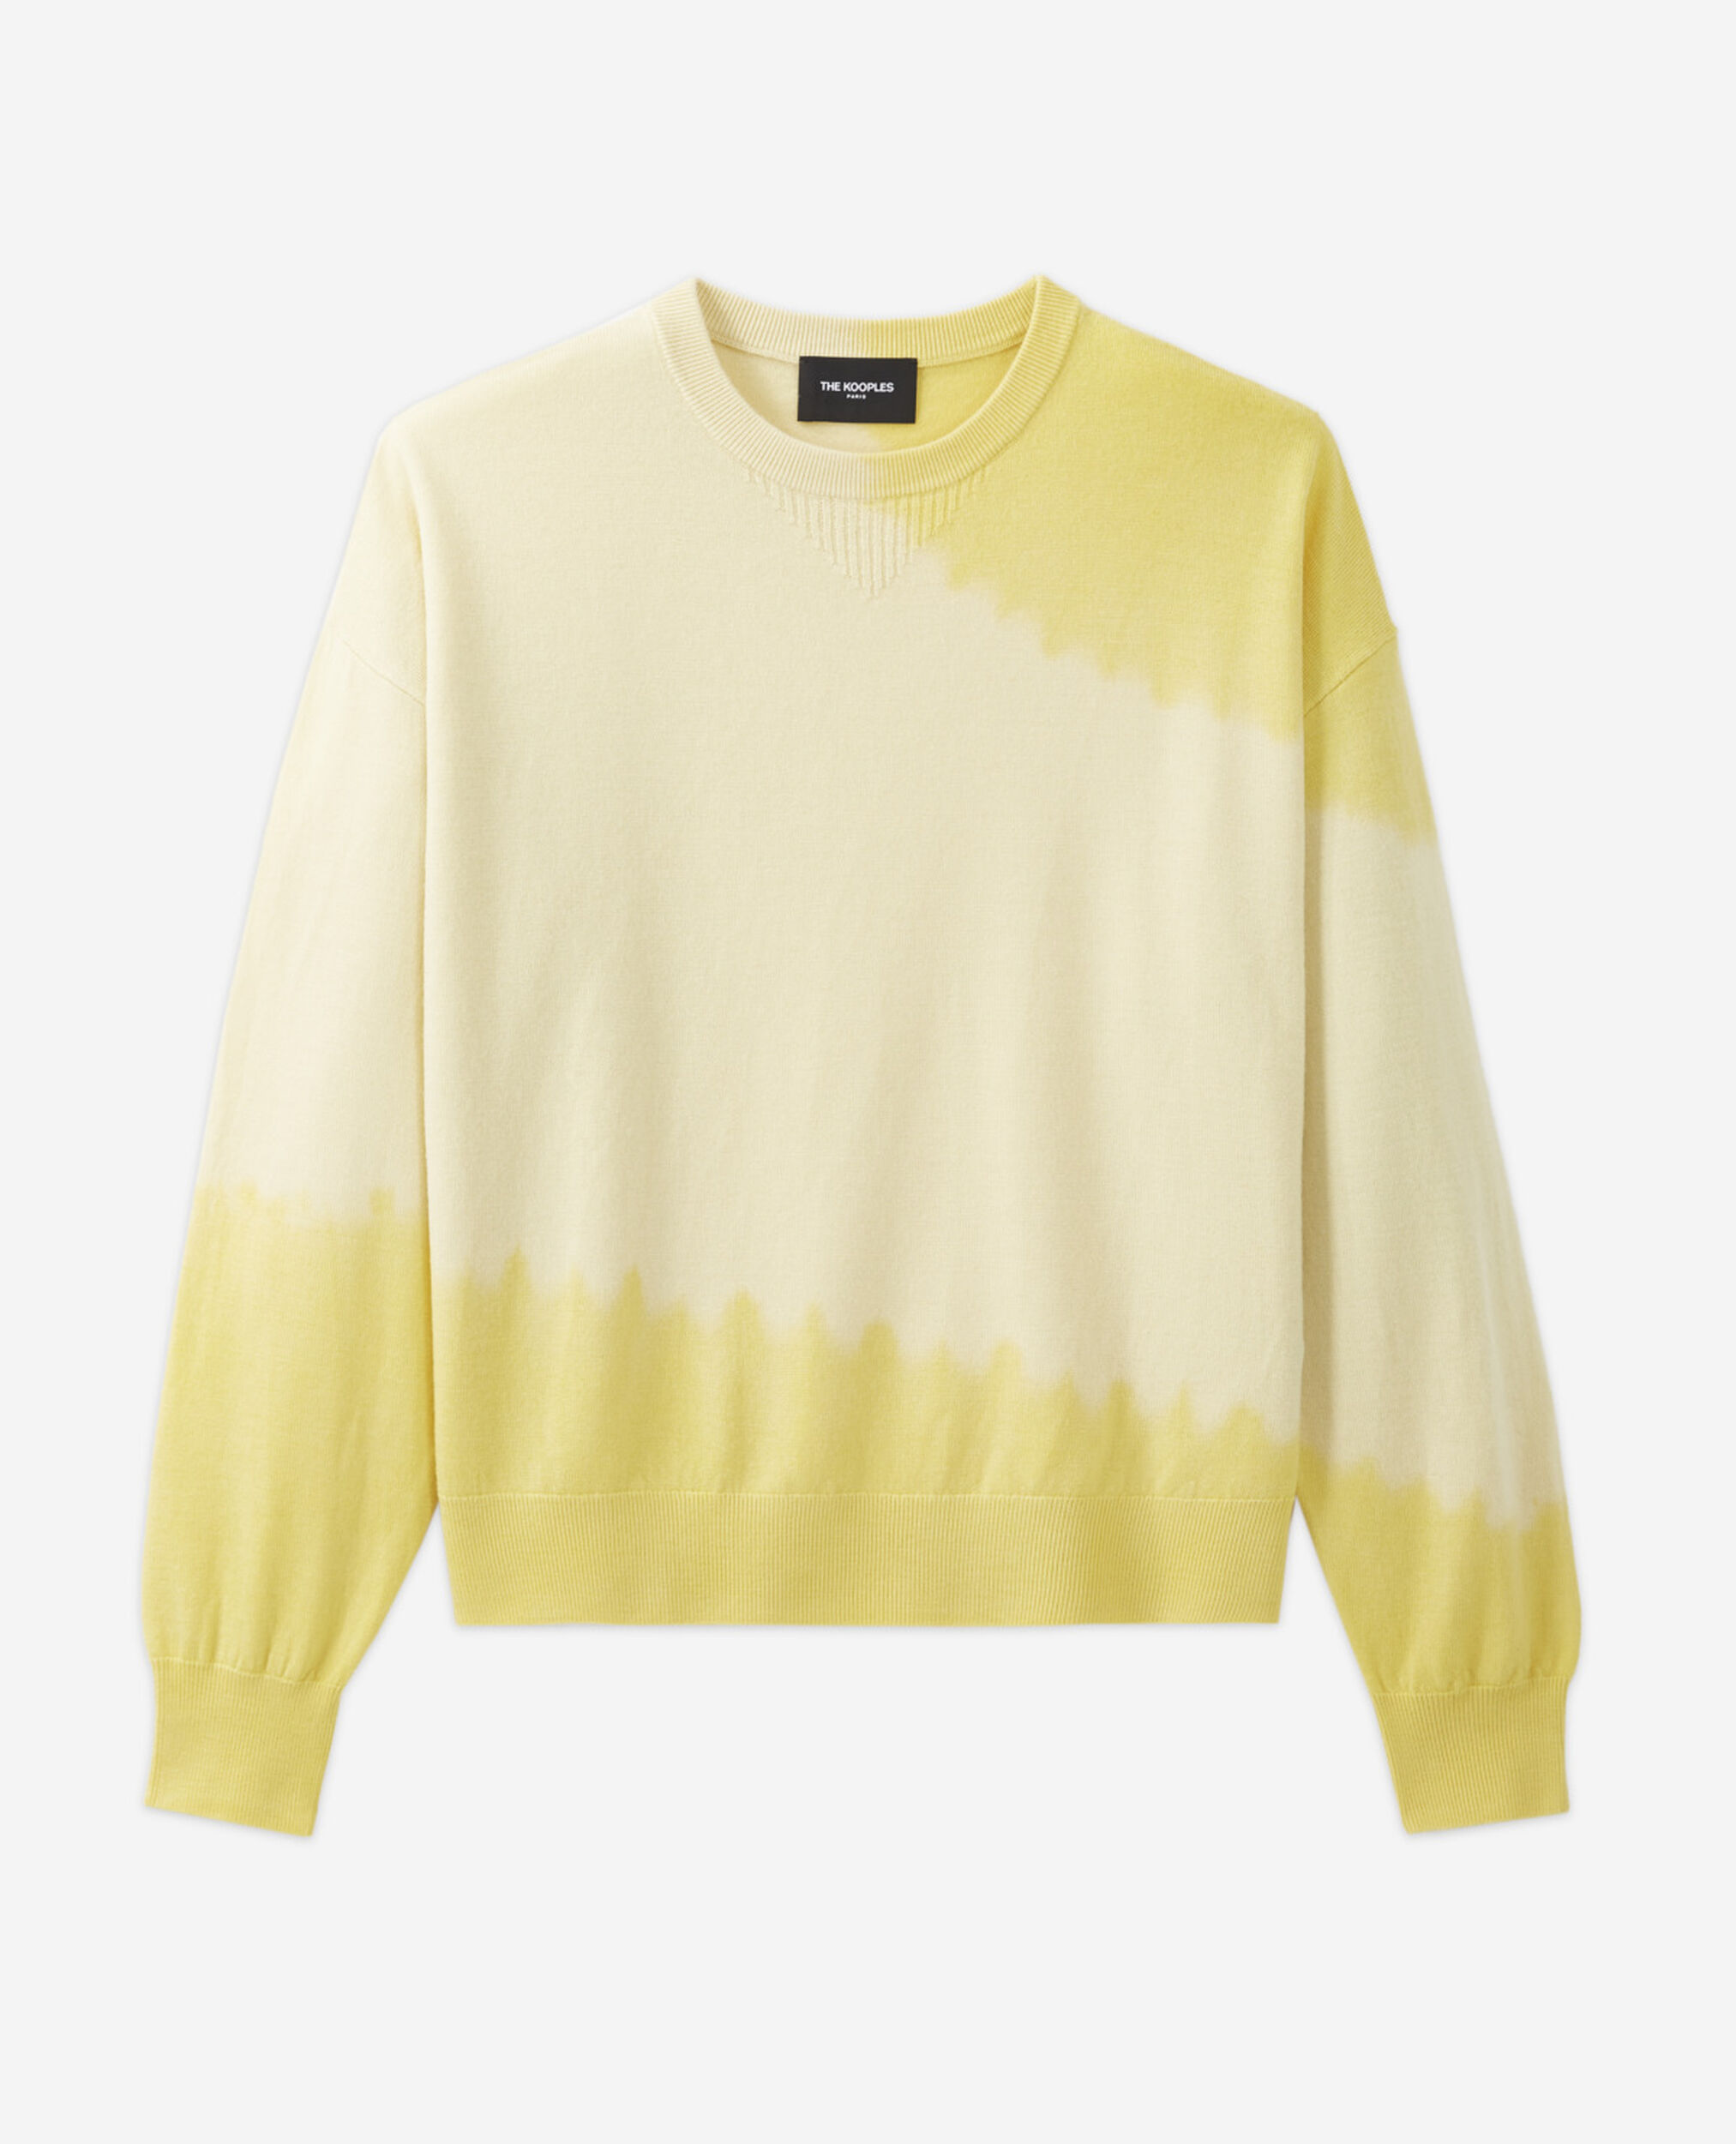 Pull jaune laine effet tie - dye, YELLOW, hi-res image number null